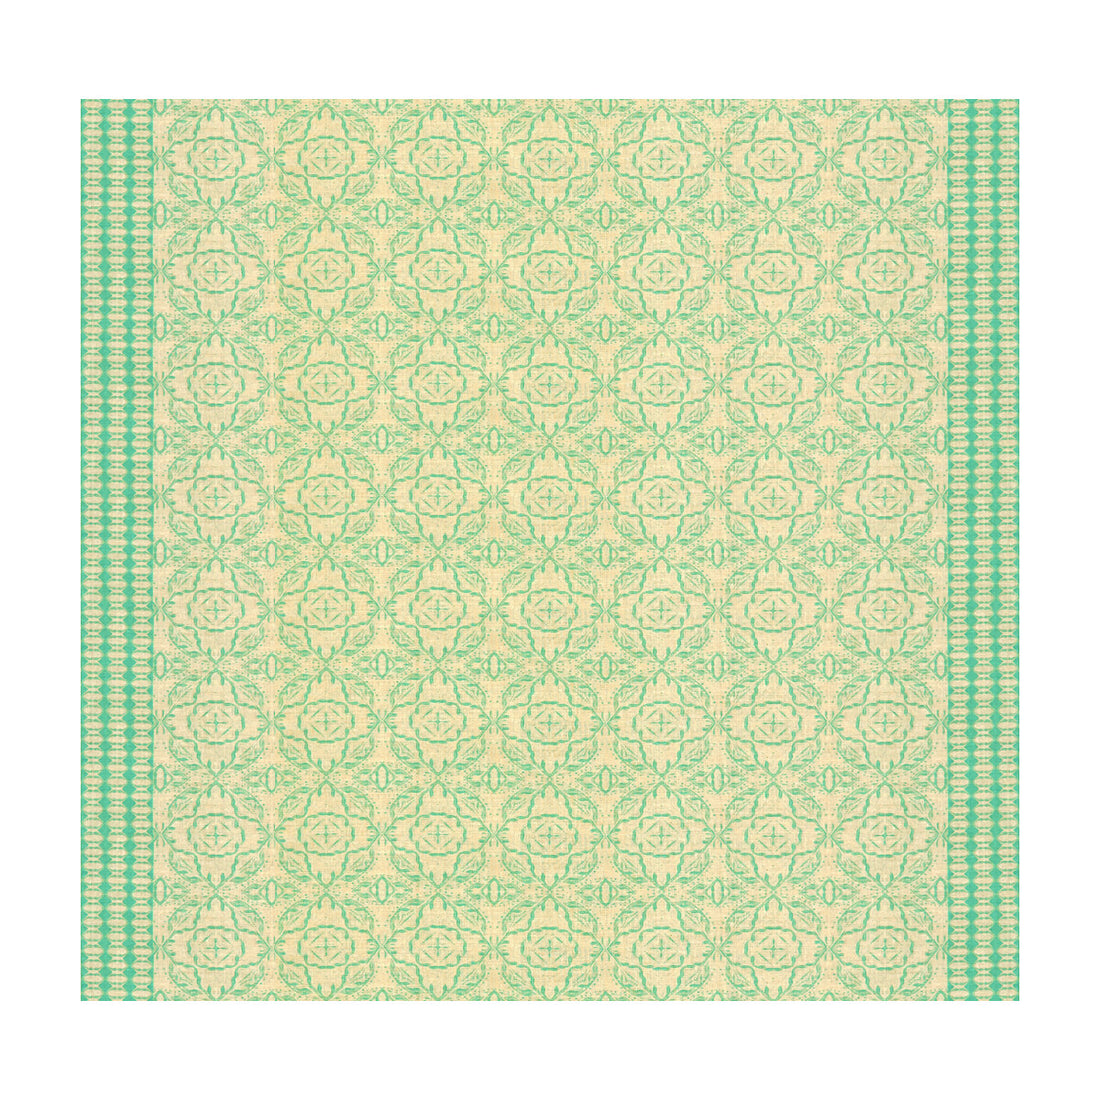 Maze fabric in aqua color - pattern GWF-3506.13.0 - by Lee Jofa Modern in the Allegra Hicks Garden collection